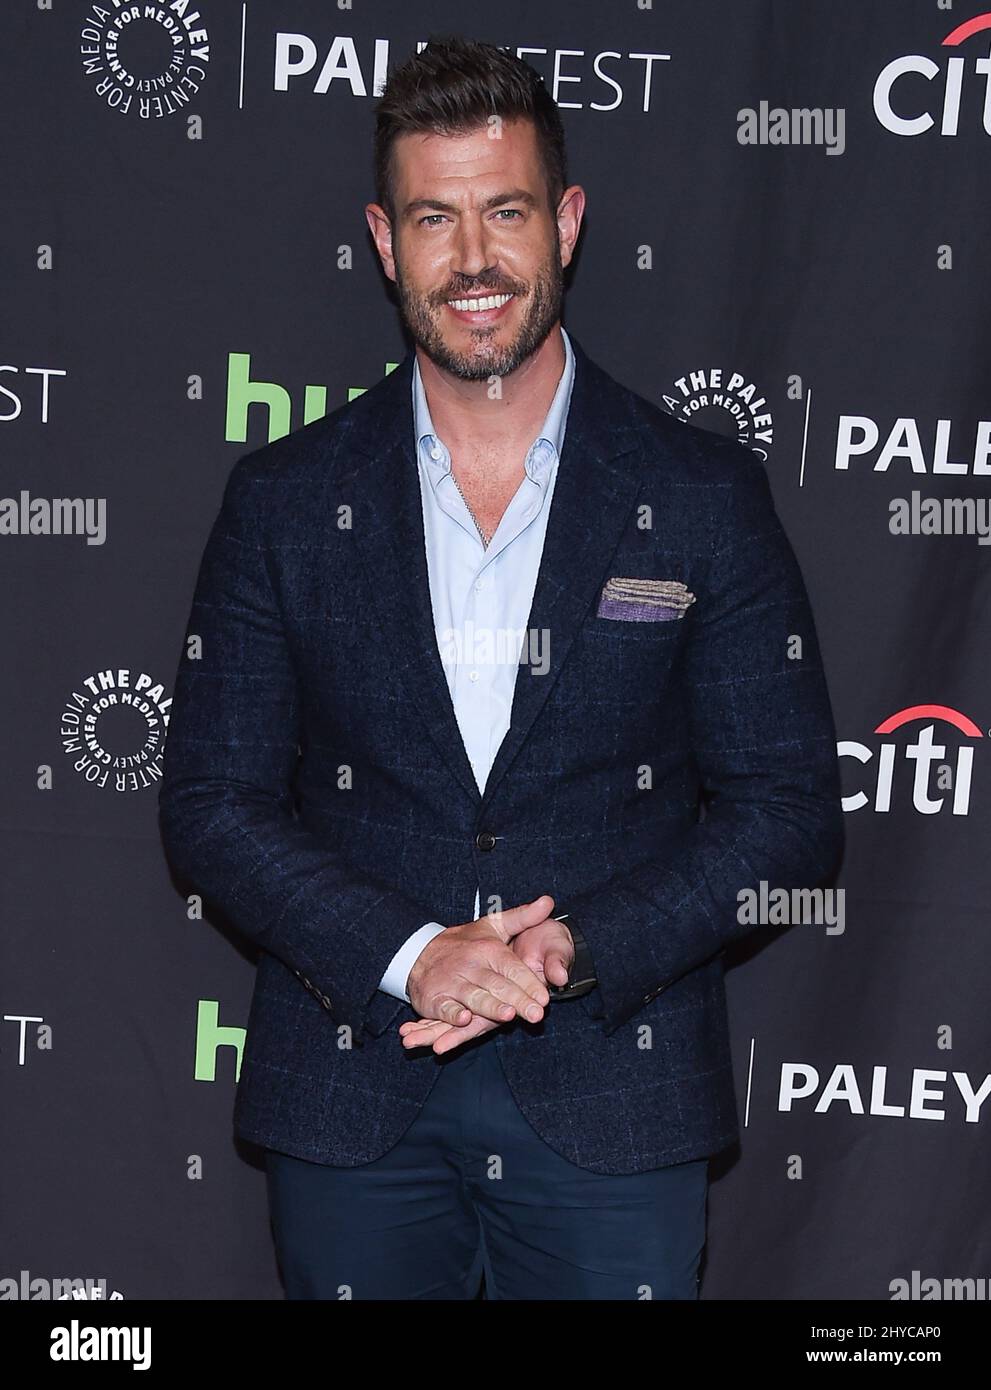 Jesse Palmer attending the 34th Annual PaleyFest, held at the Dolby Theatre, in Los Angeles, California Stock Photo